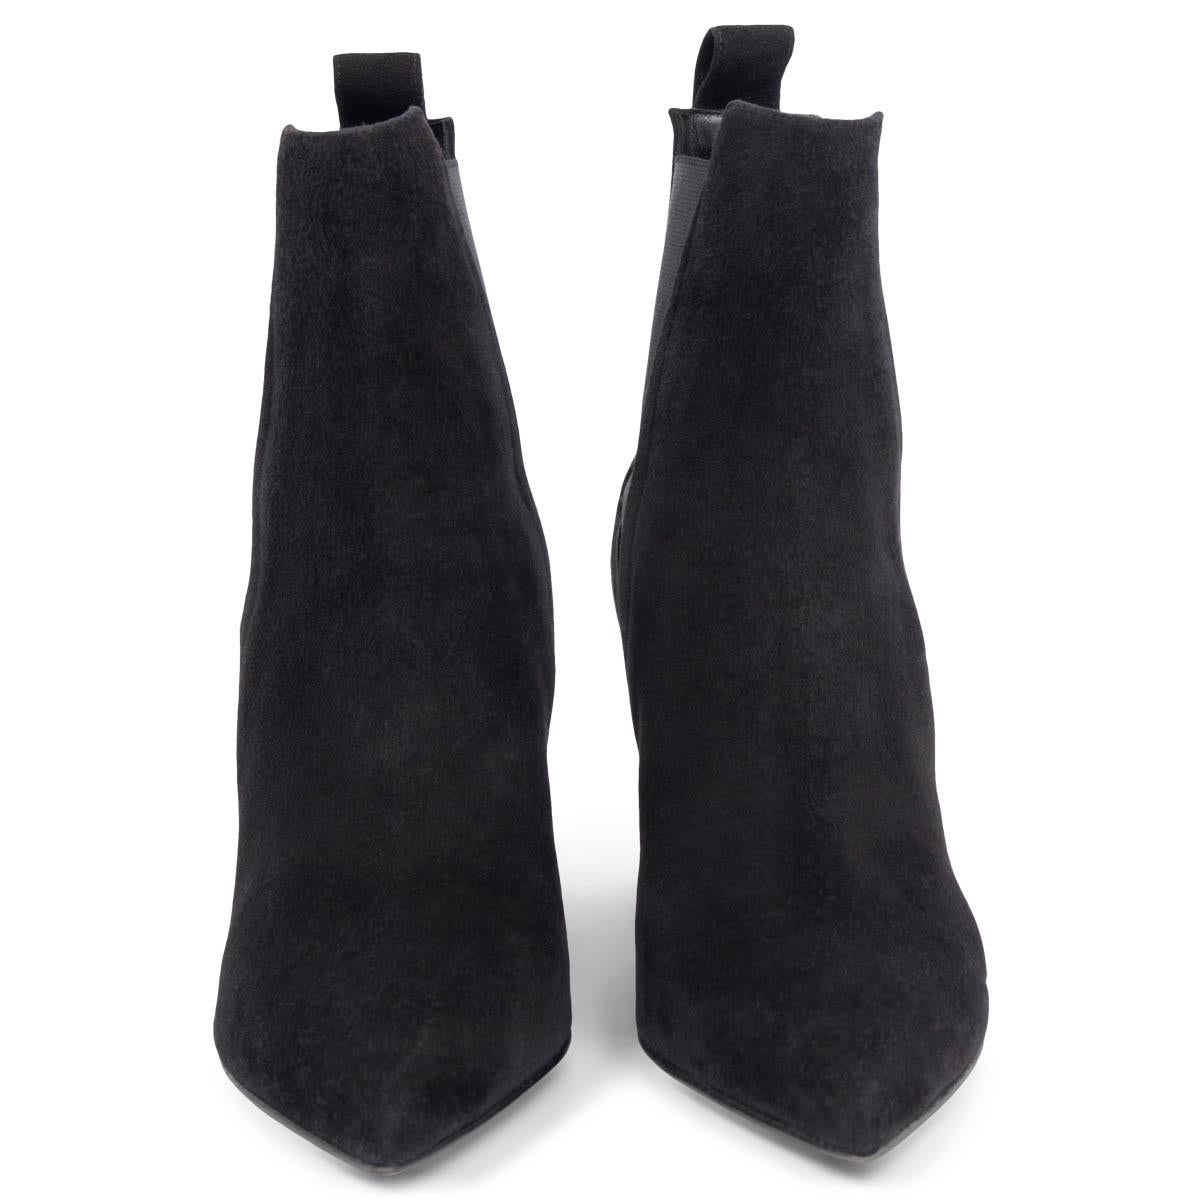 100% authentic Sergio Rossi pointed-toe ankle boots in black suede featuring elastic parts in the side. Have been worn and are in excellent condition. 

Measurements
Imprinted Size	38
Shoe Size	38
Inside Sole	25cm (9.8in)
Width	7.5cm